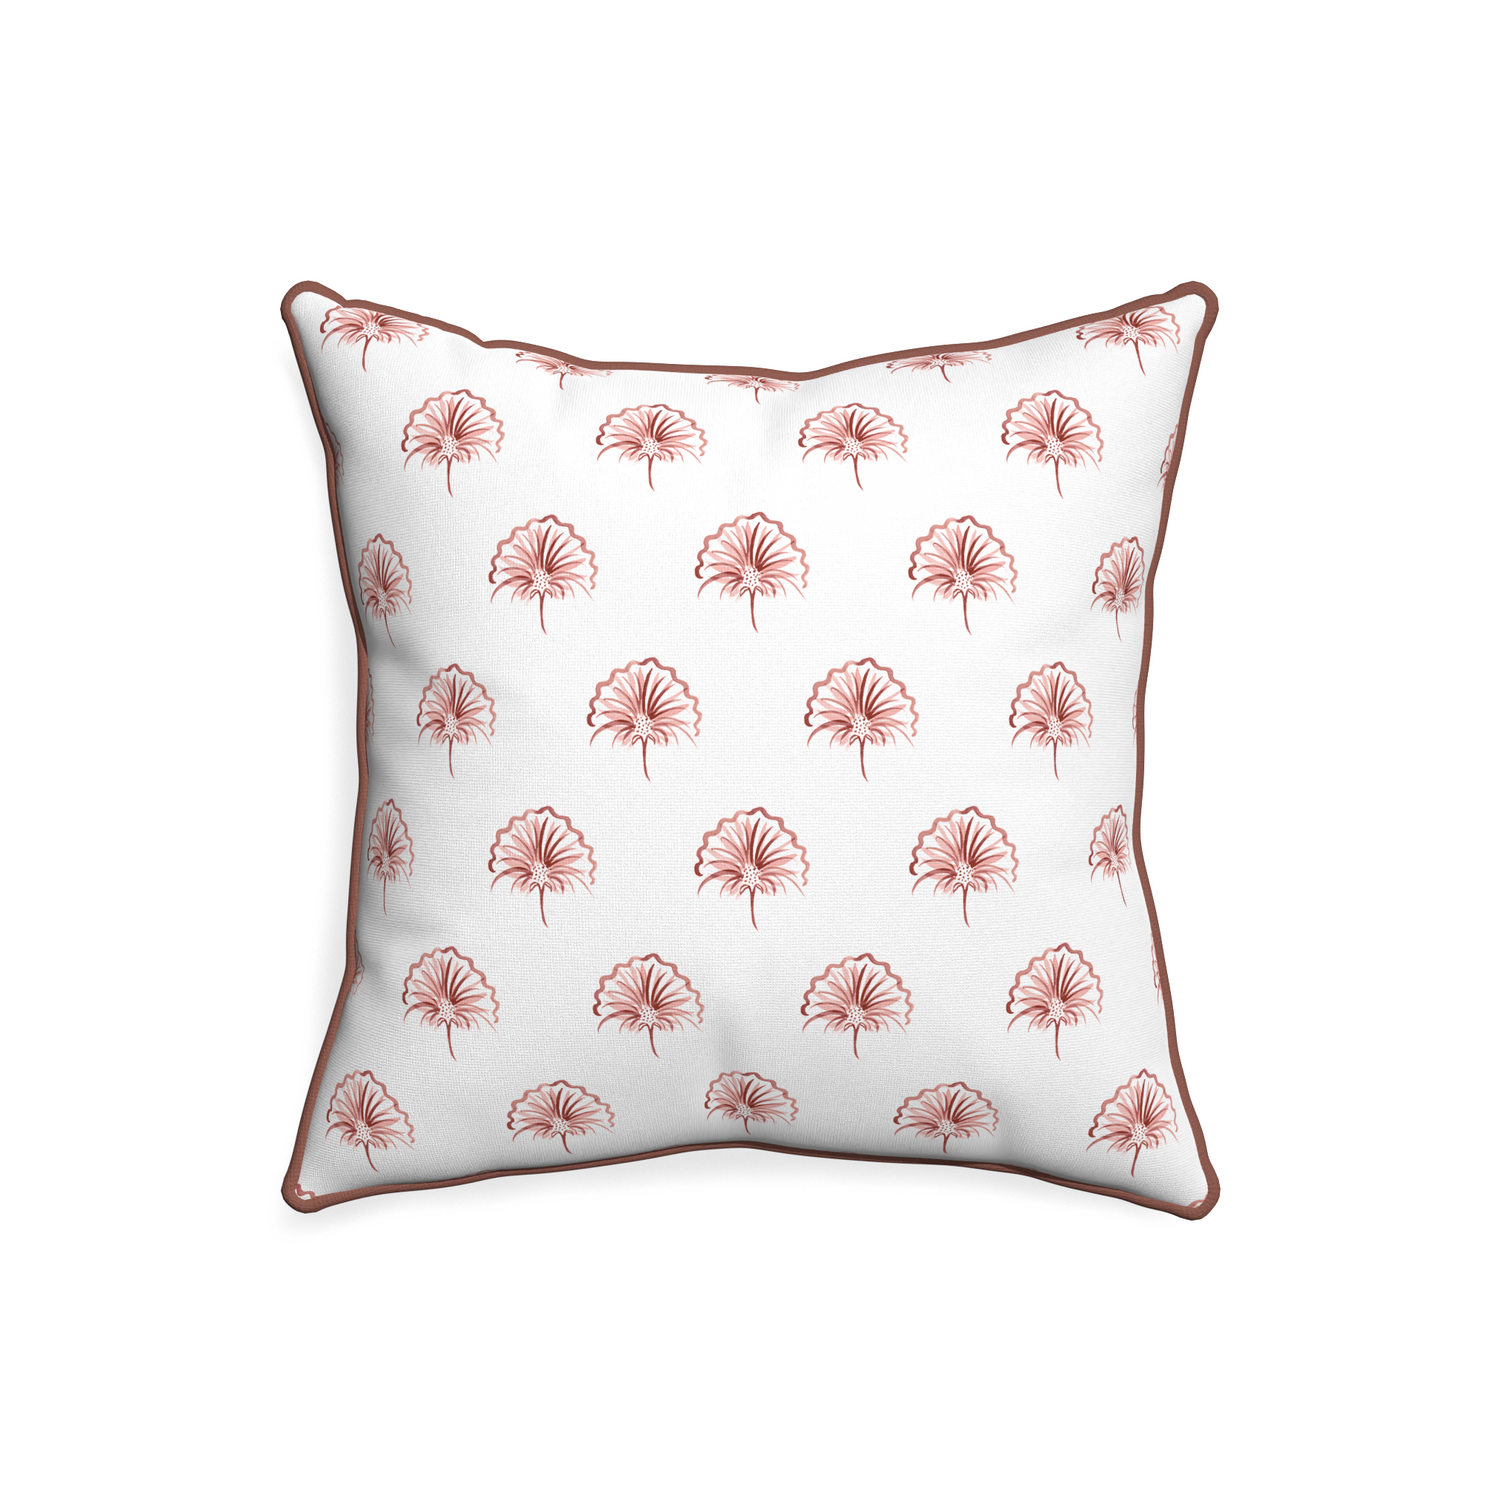 20-square penelope rose custom floral pinkpillow with w piping on white background